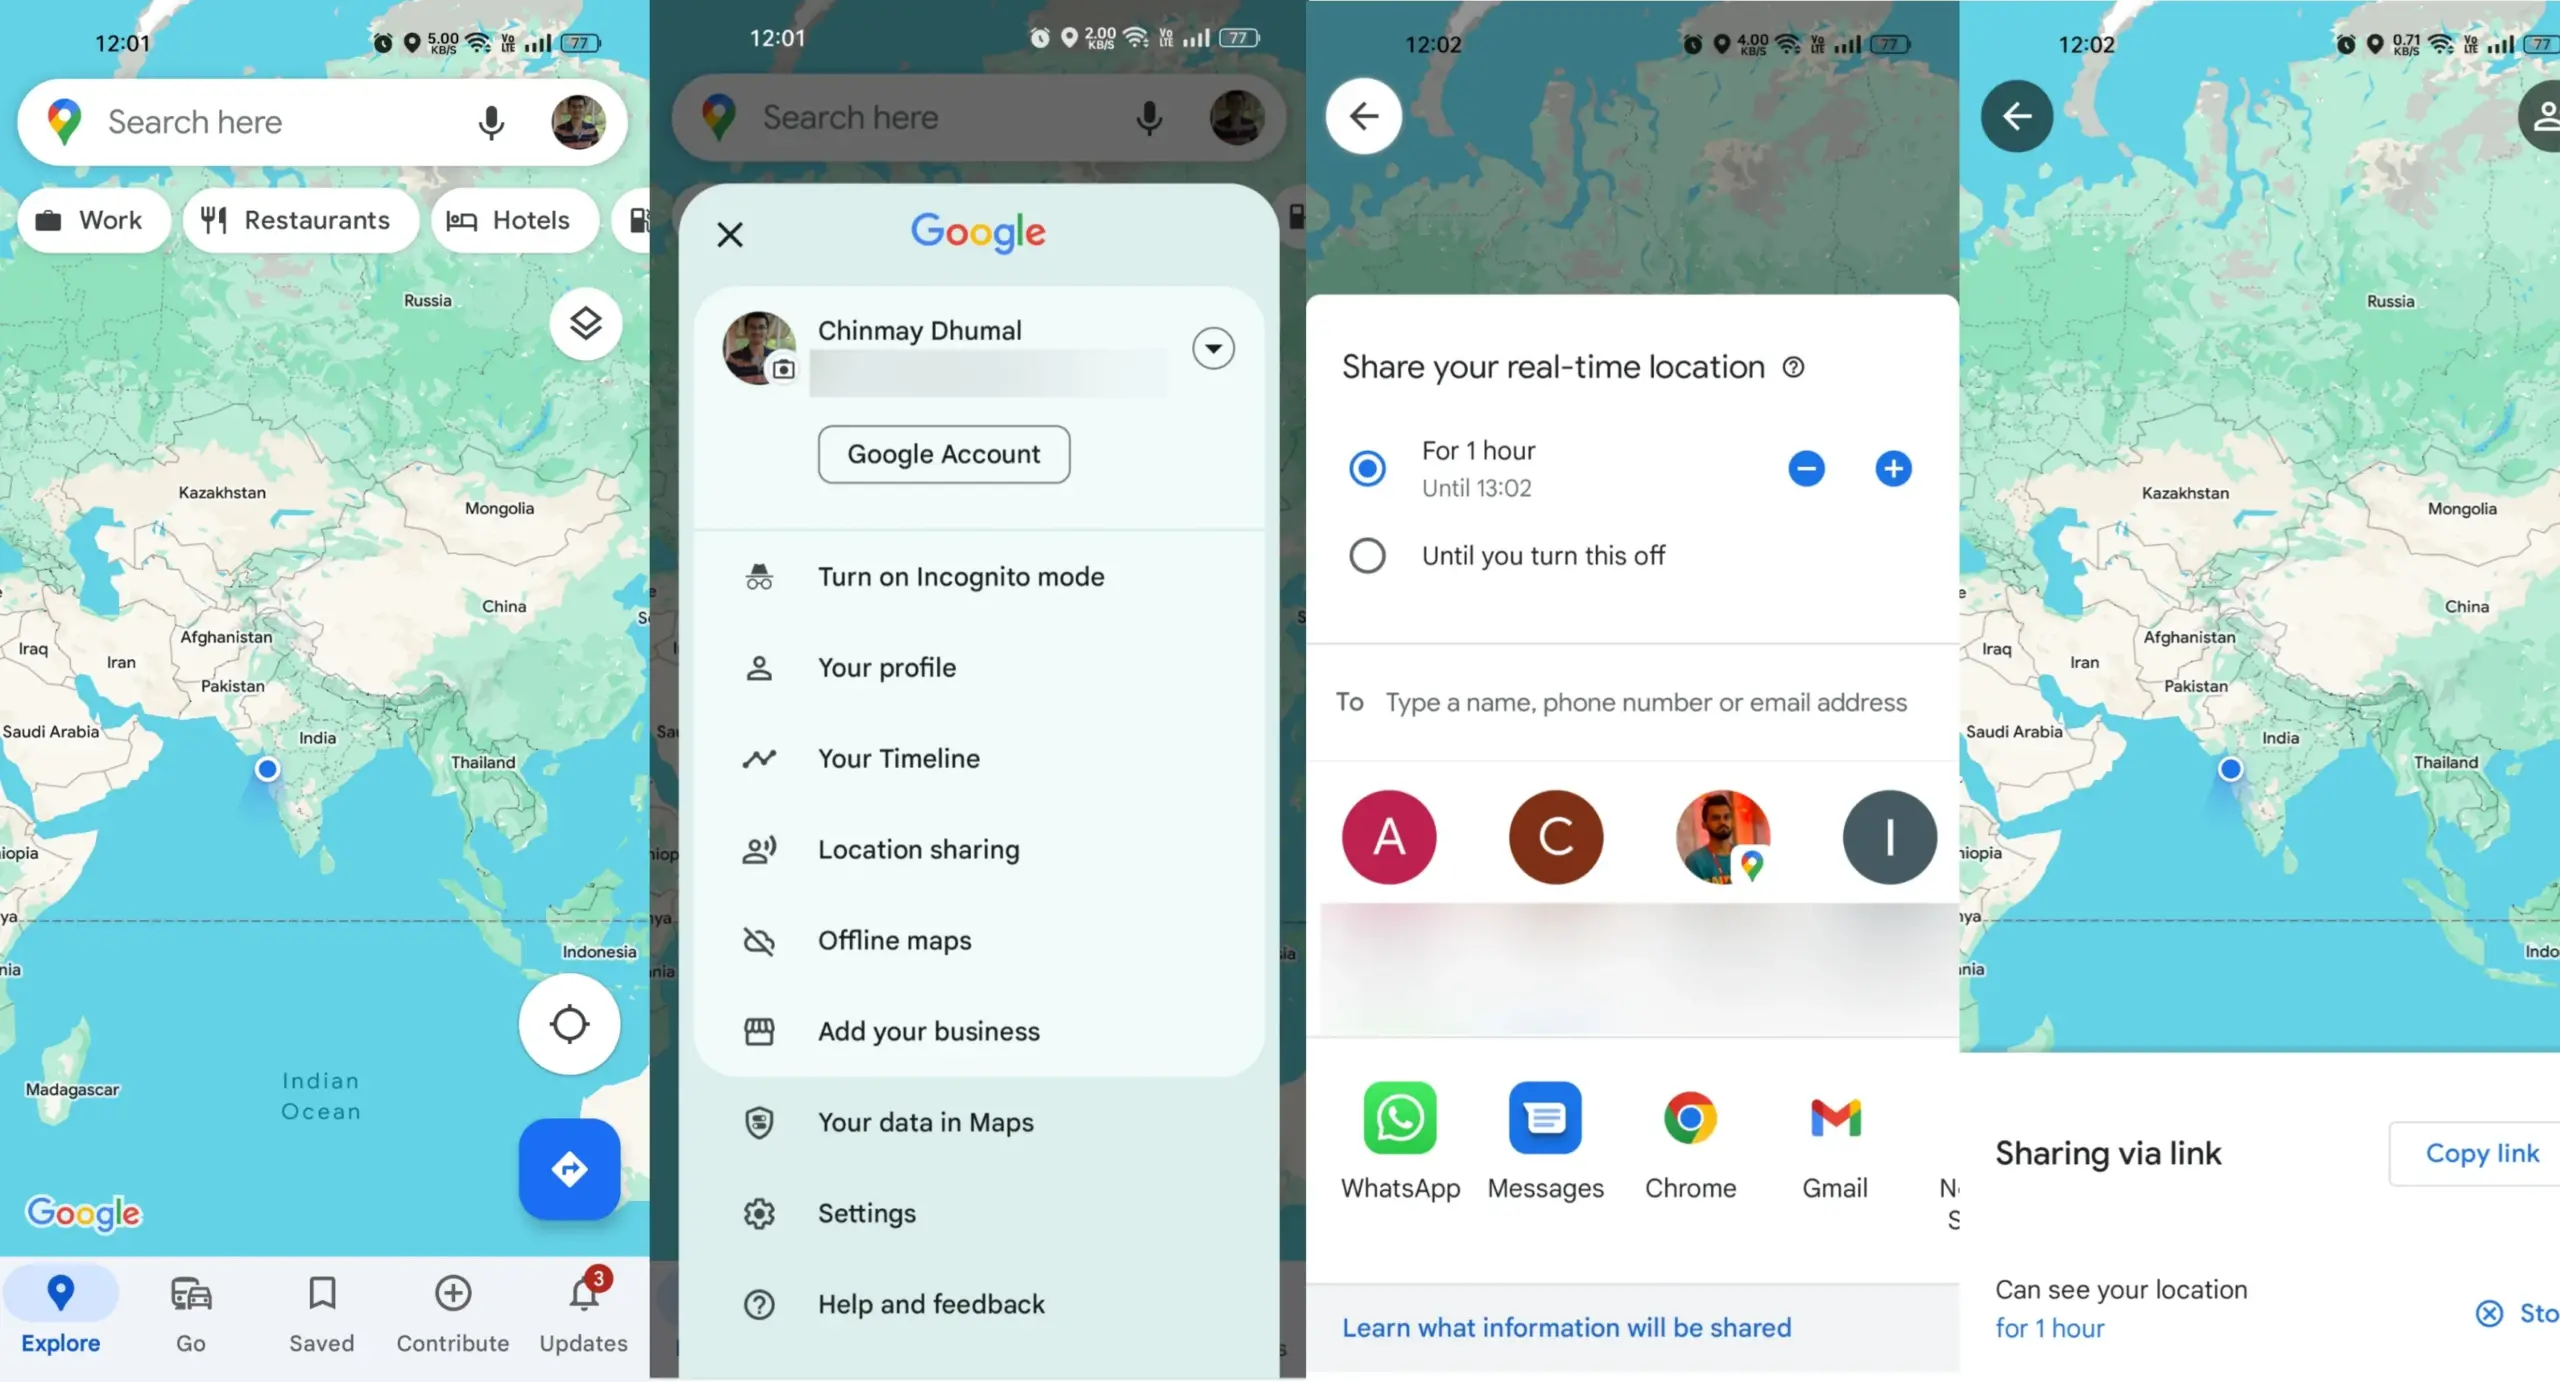 Google Maps Introduces Live Location Sharing